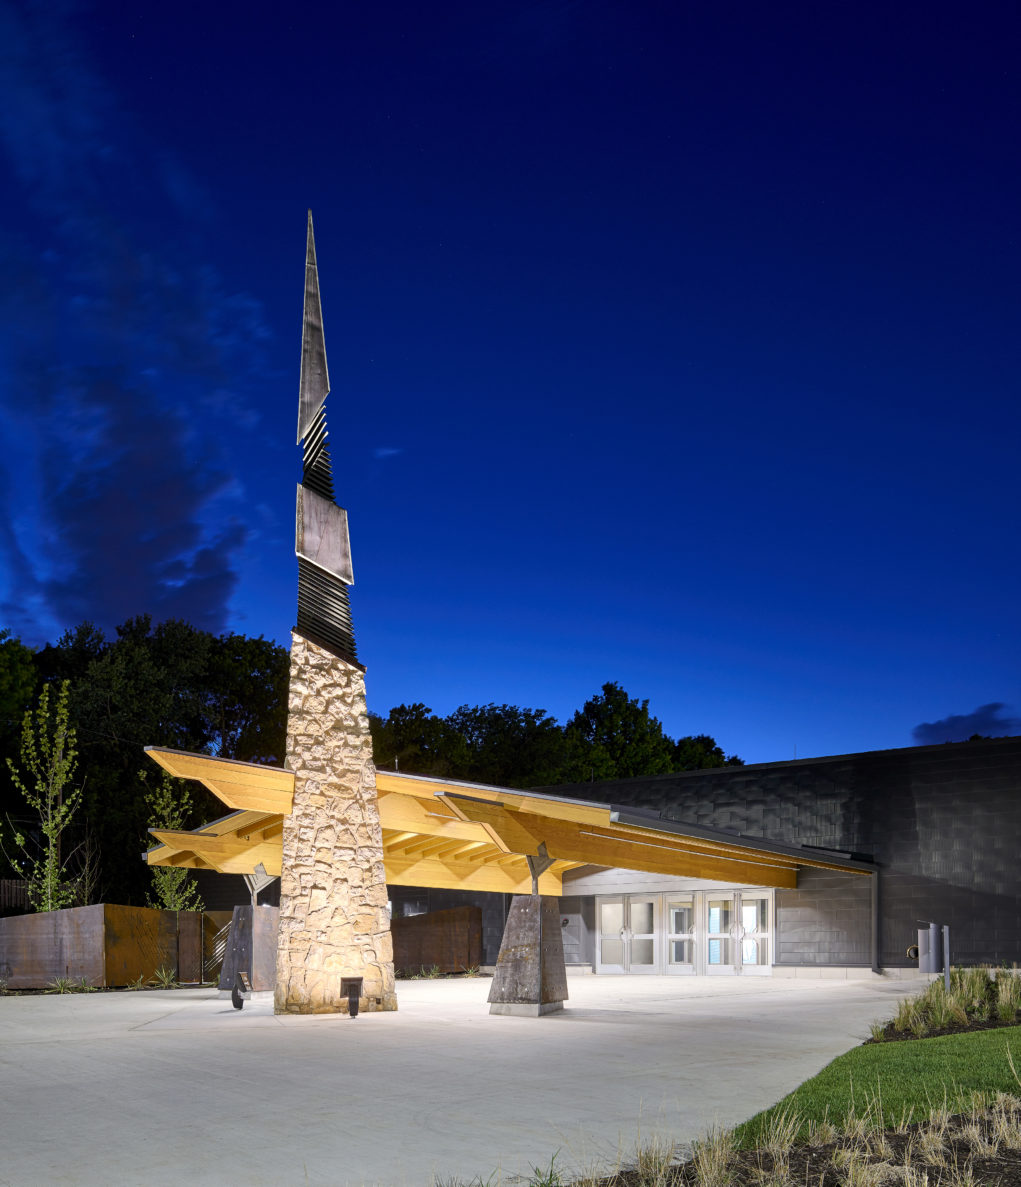 Johnson County arts and heritage center by mccowngordon